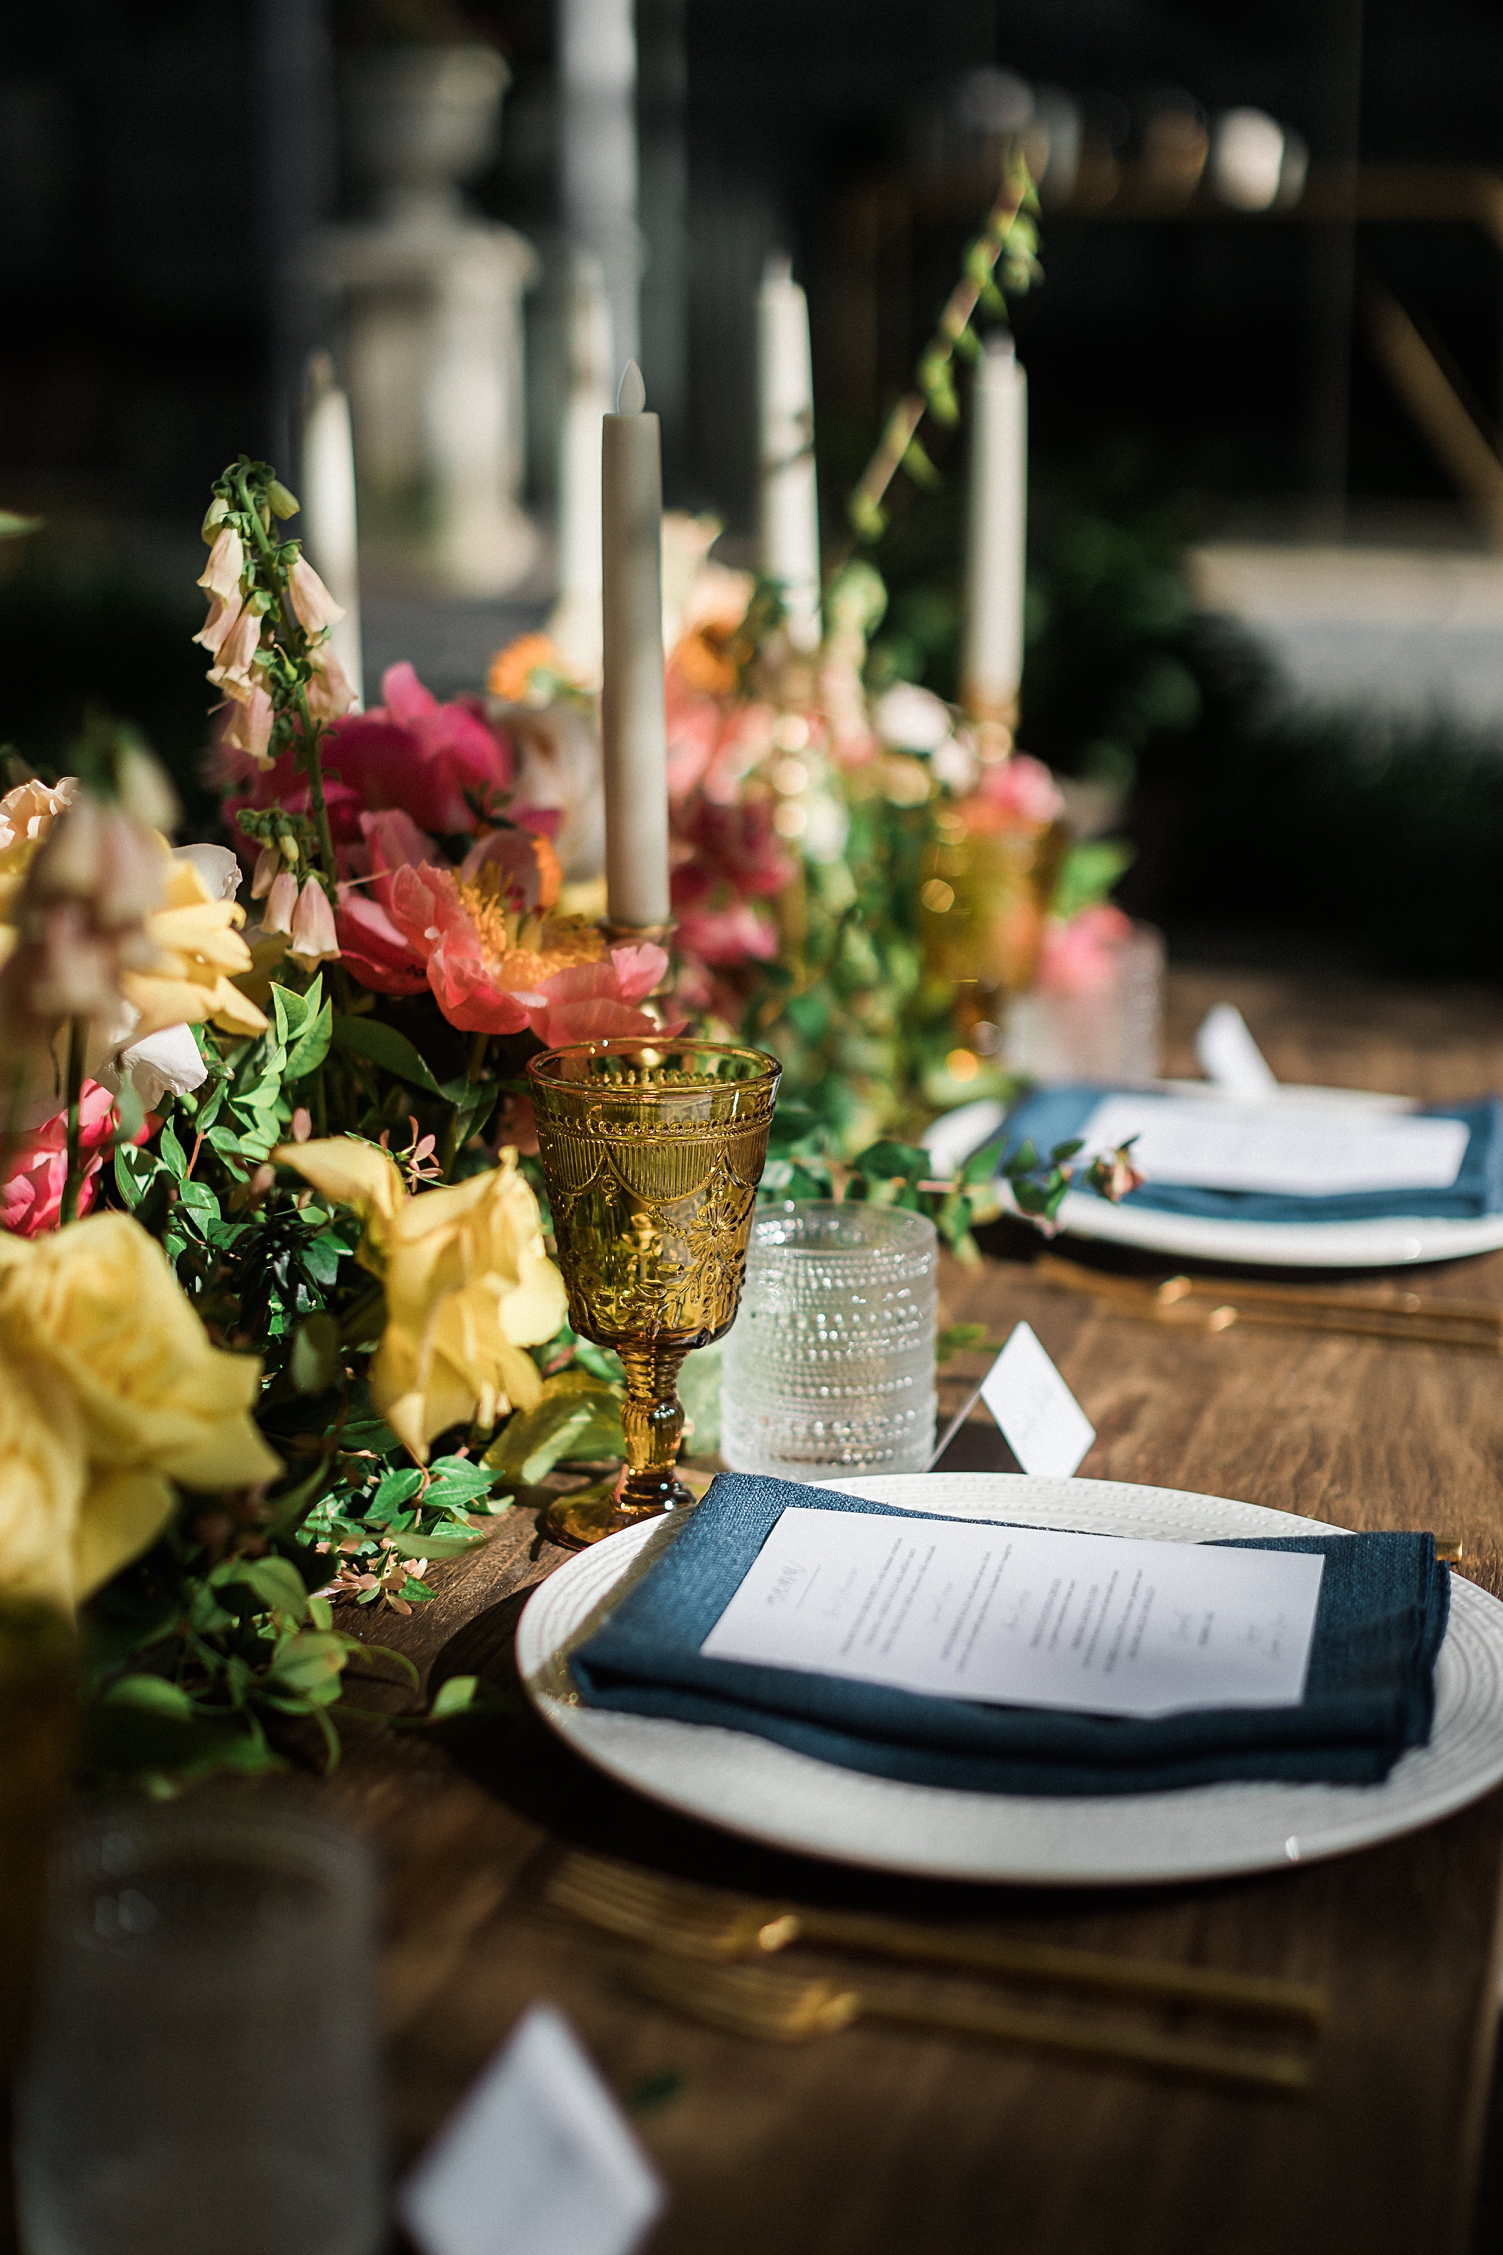 Outdoor garden wedding reception table with pink flowers and blue linens